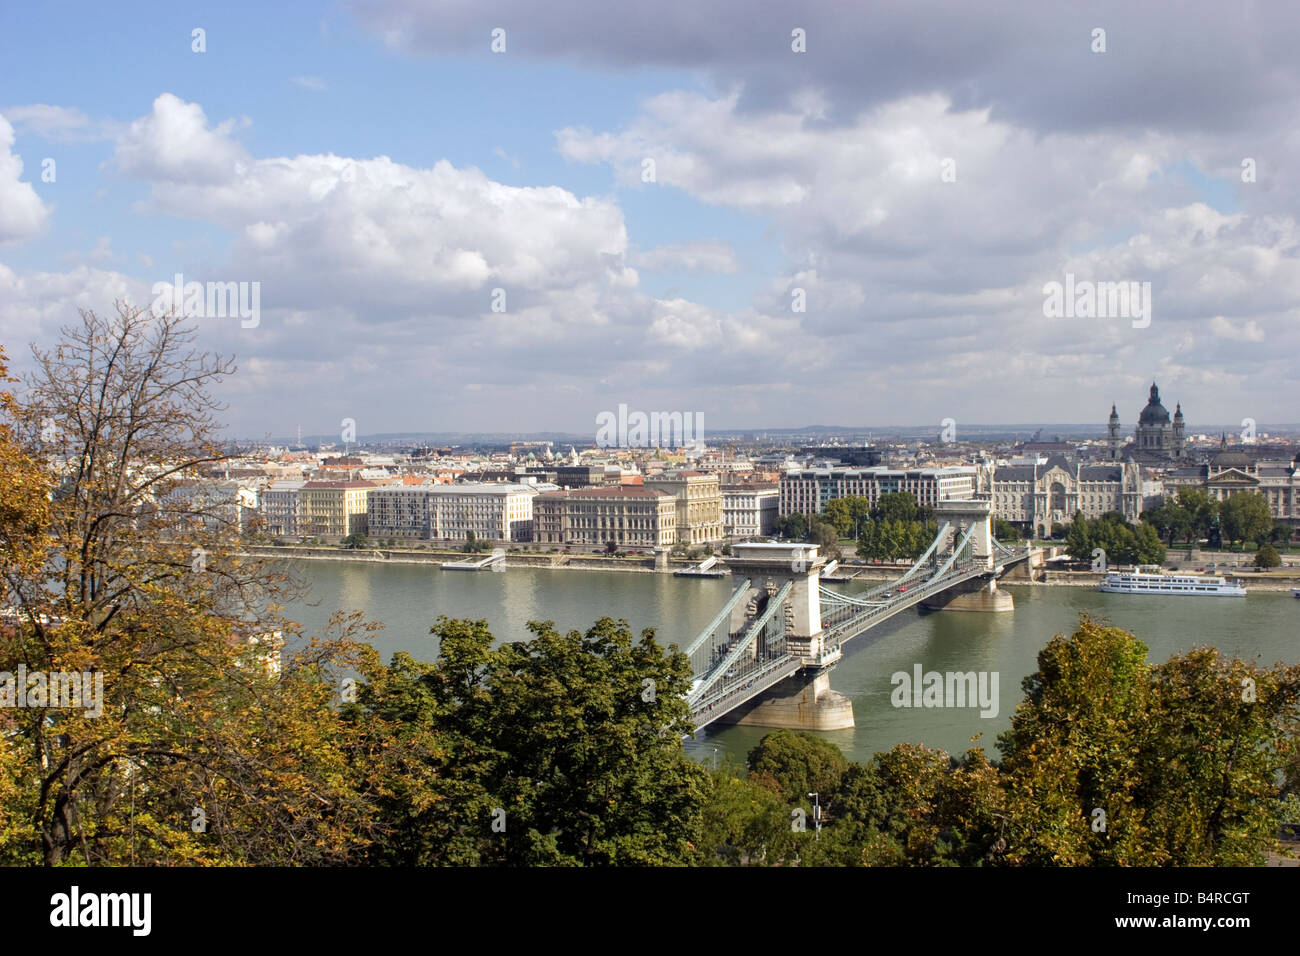 Views of the Chain Bridge (Széchenyi Lánchíd) in Budapest, the first permanent connection between Buda and Pestin in Hungary Stock Photo